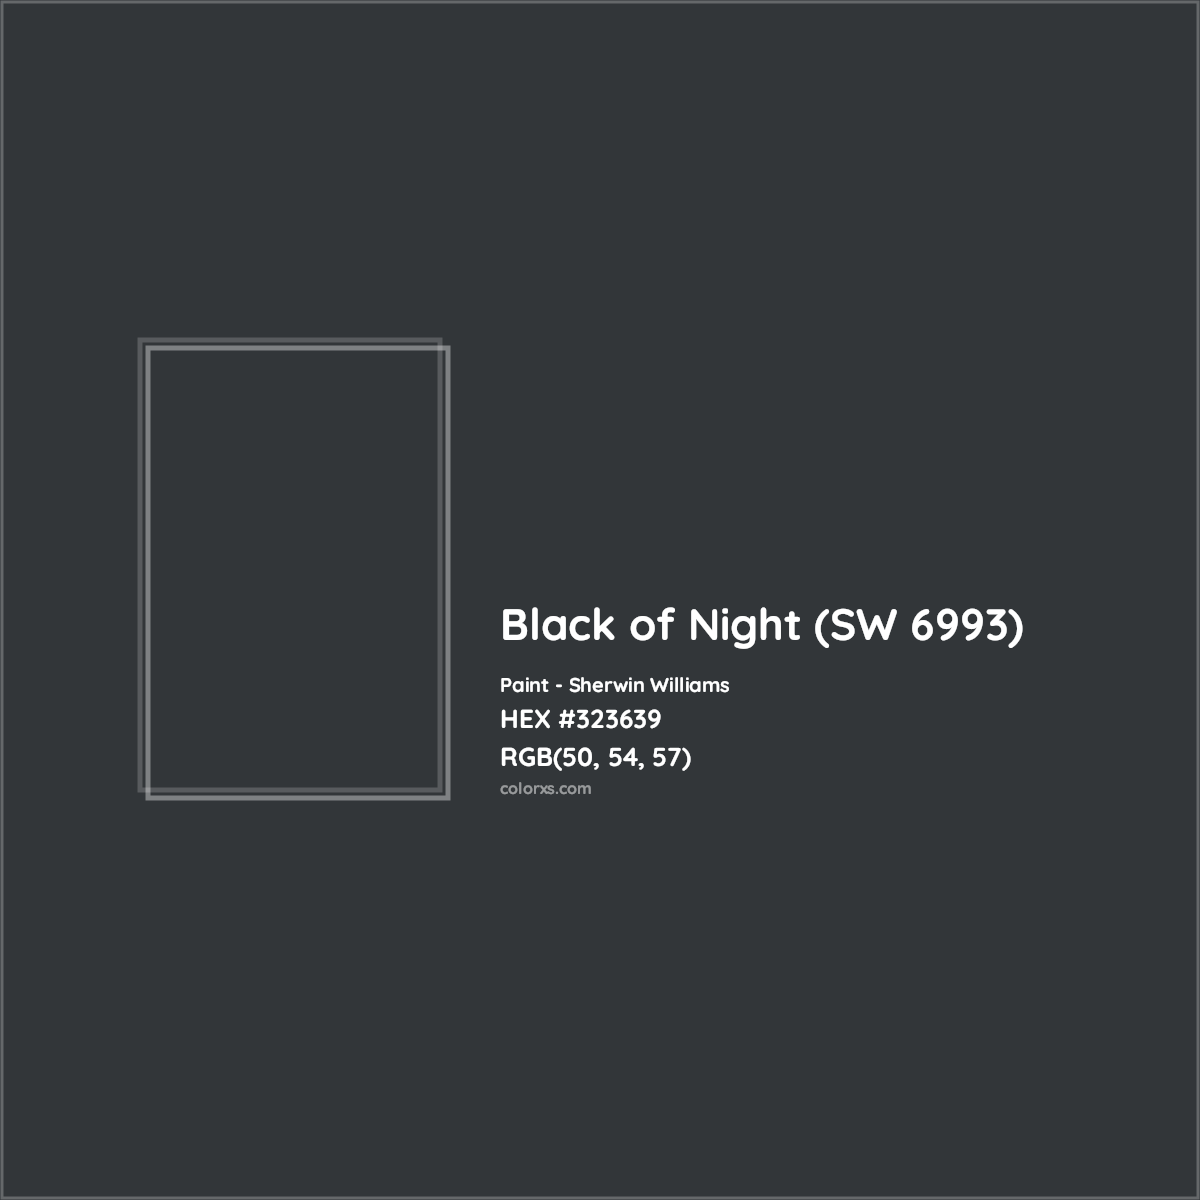 HEX #323639 Black of Night (SW 6993) Paint Sherwin Williams - Color Code